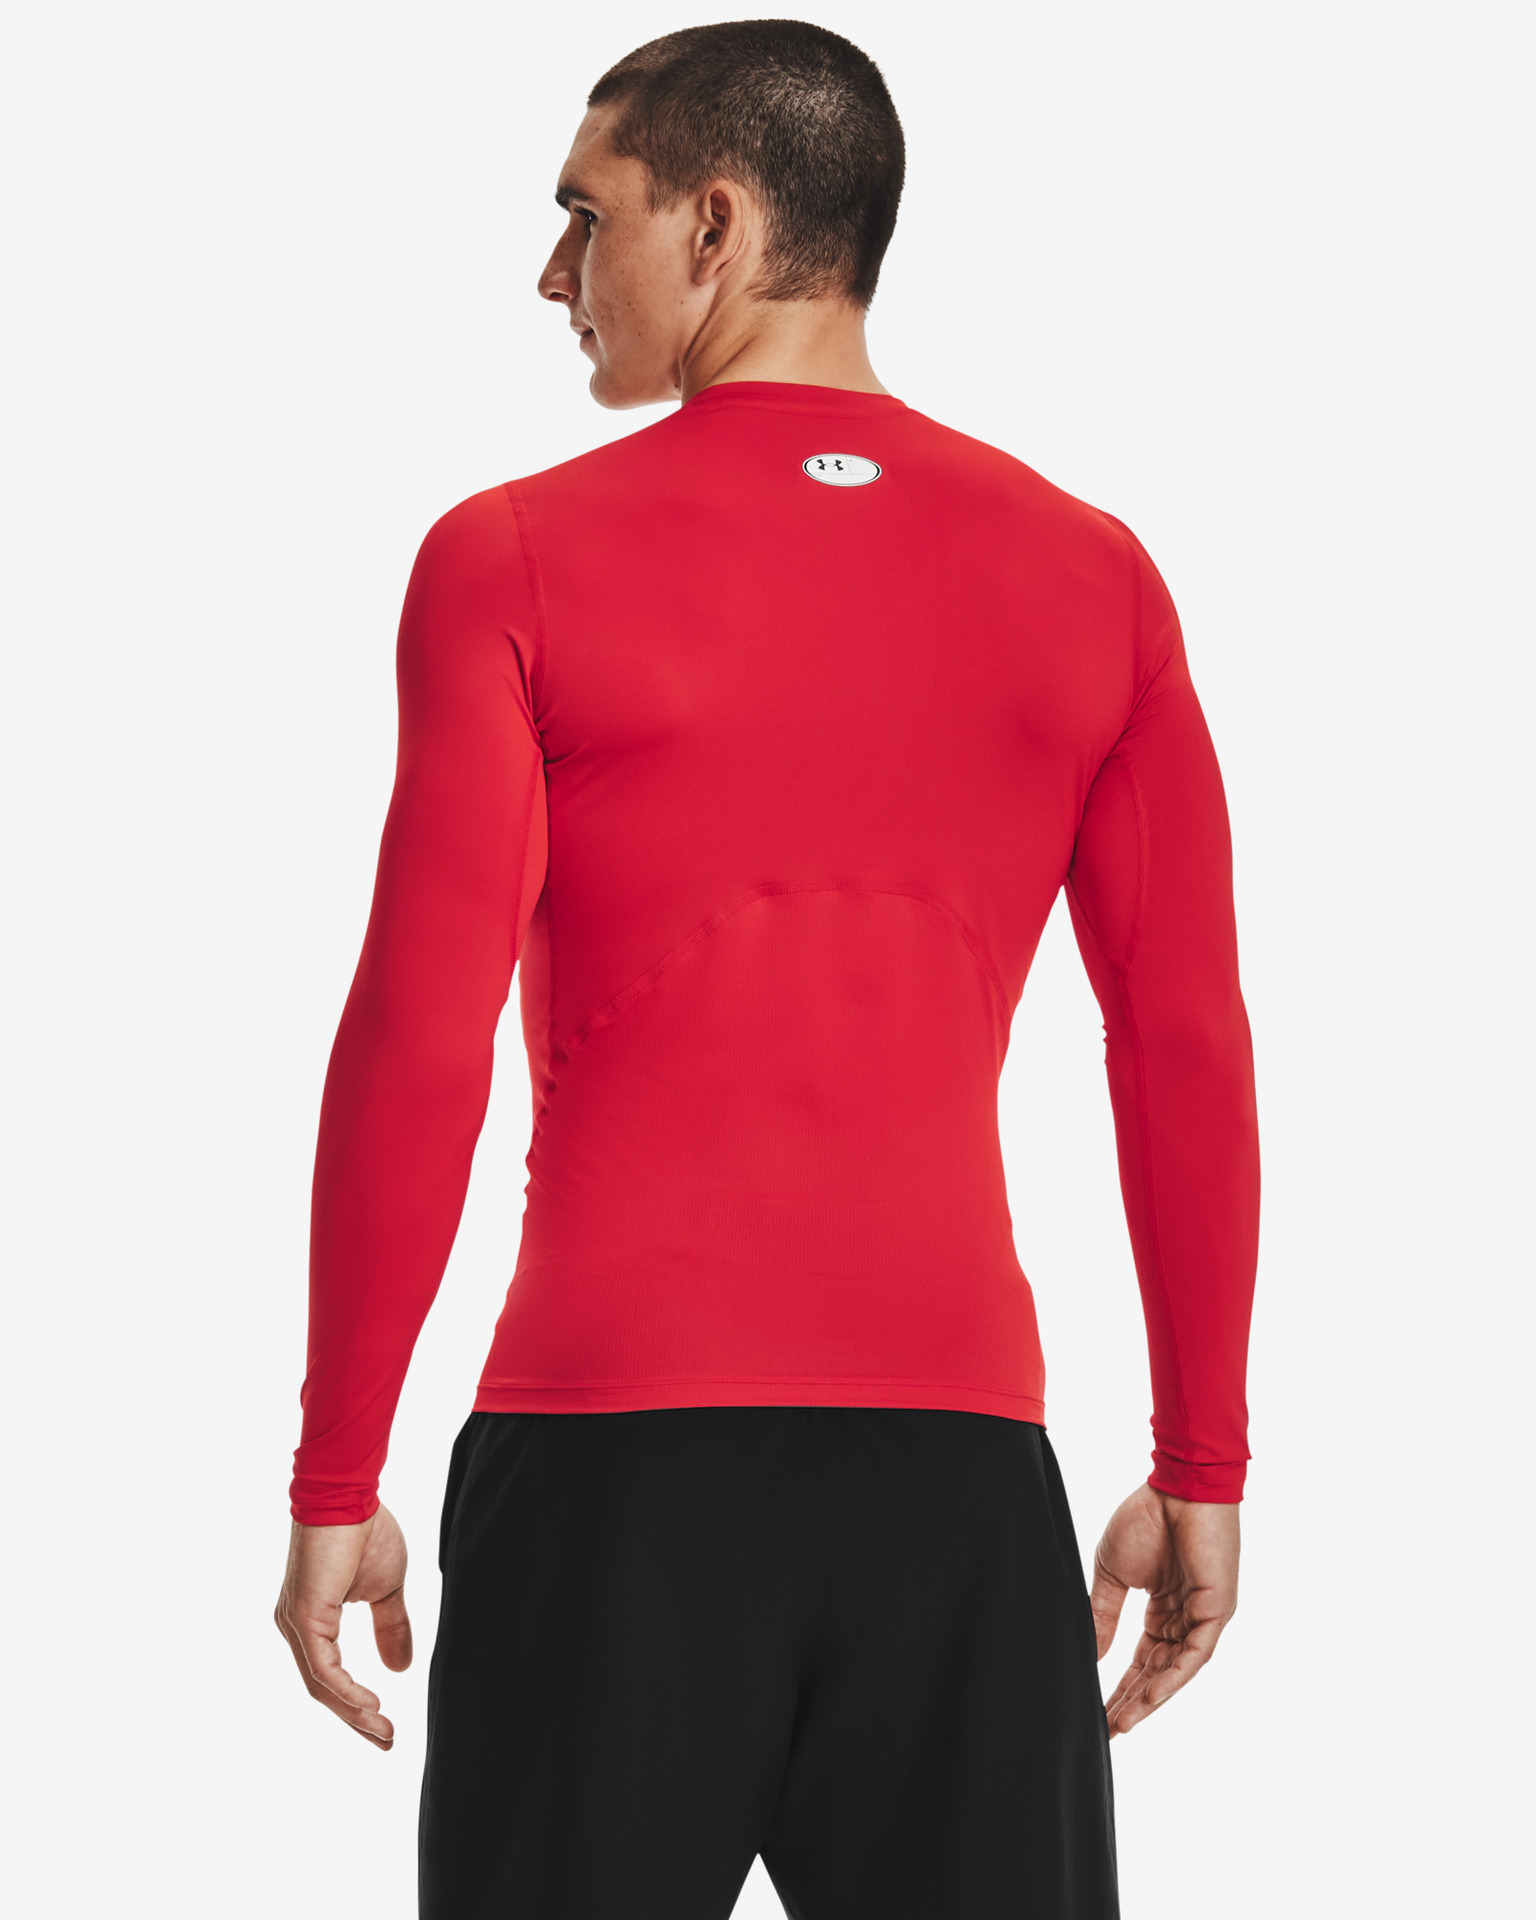 Under Armour, Shirts, Under Armour Compression Tank Top